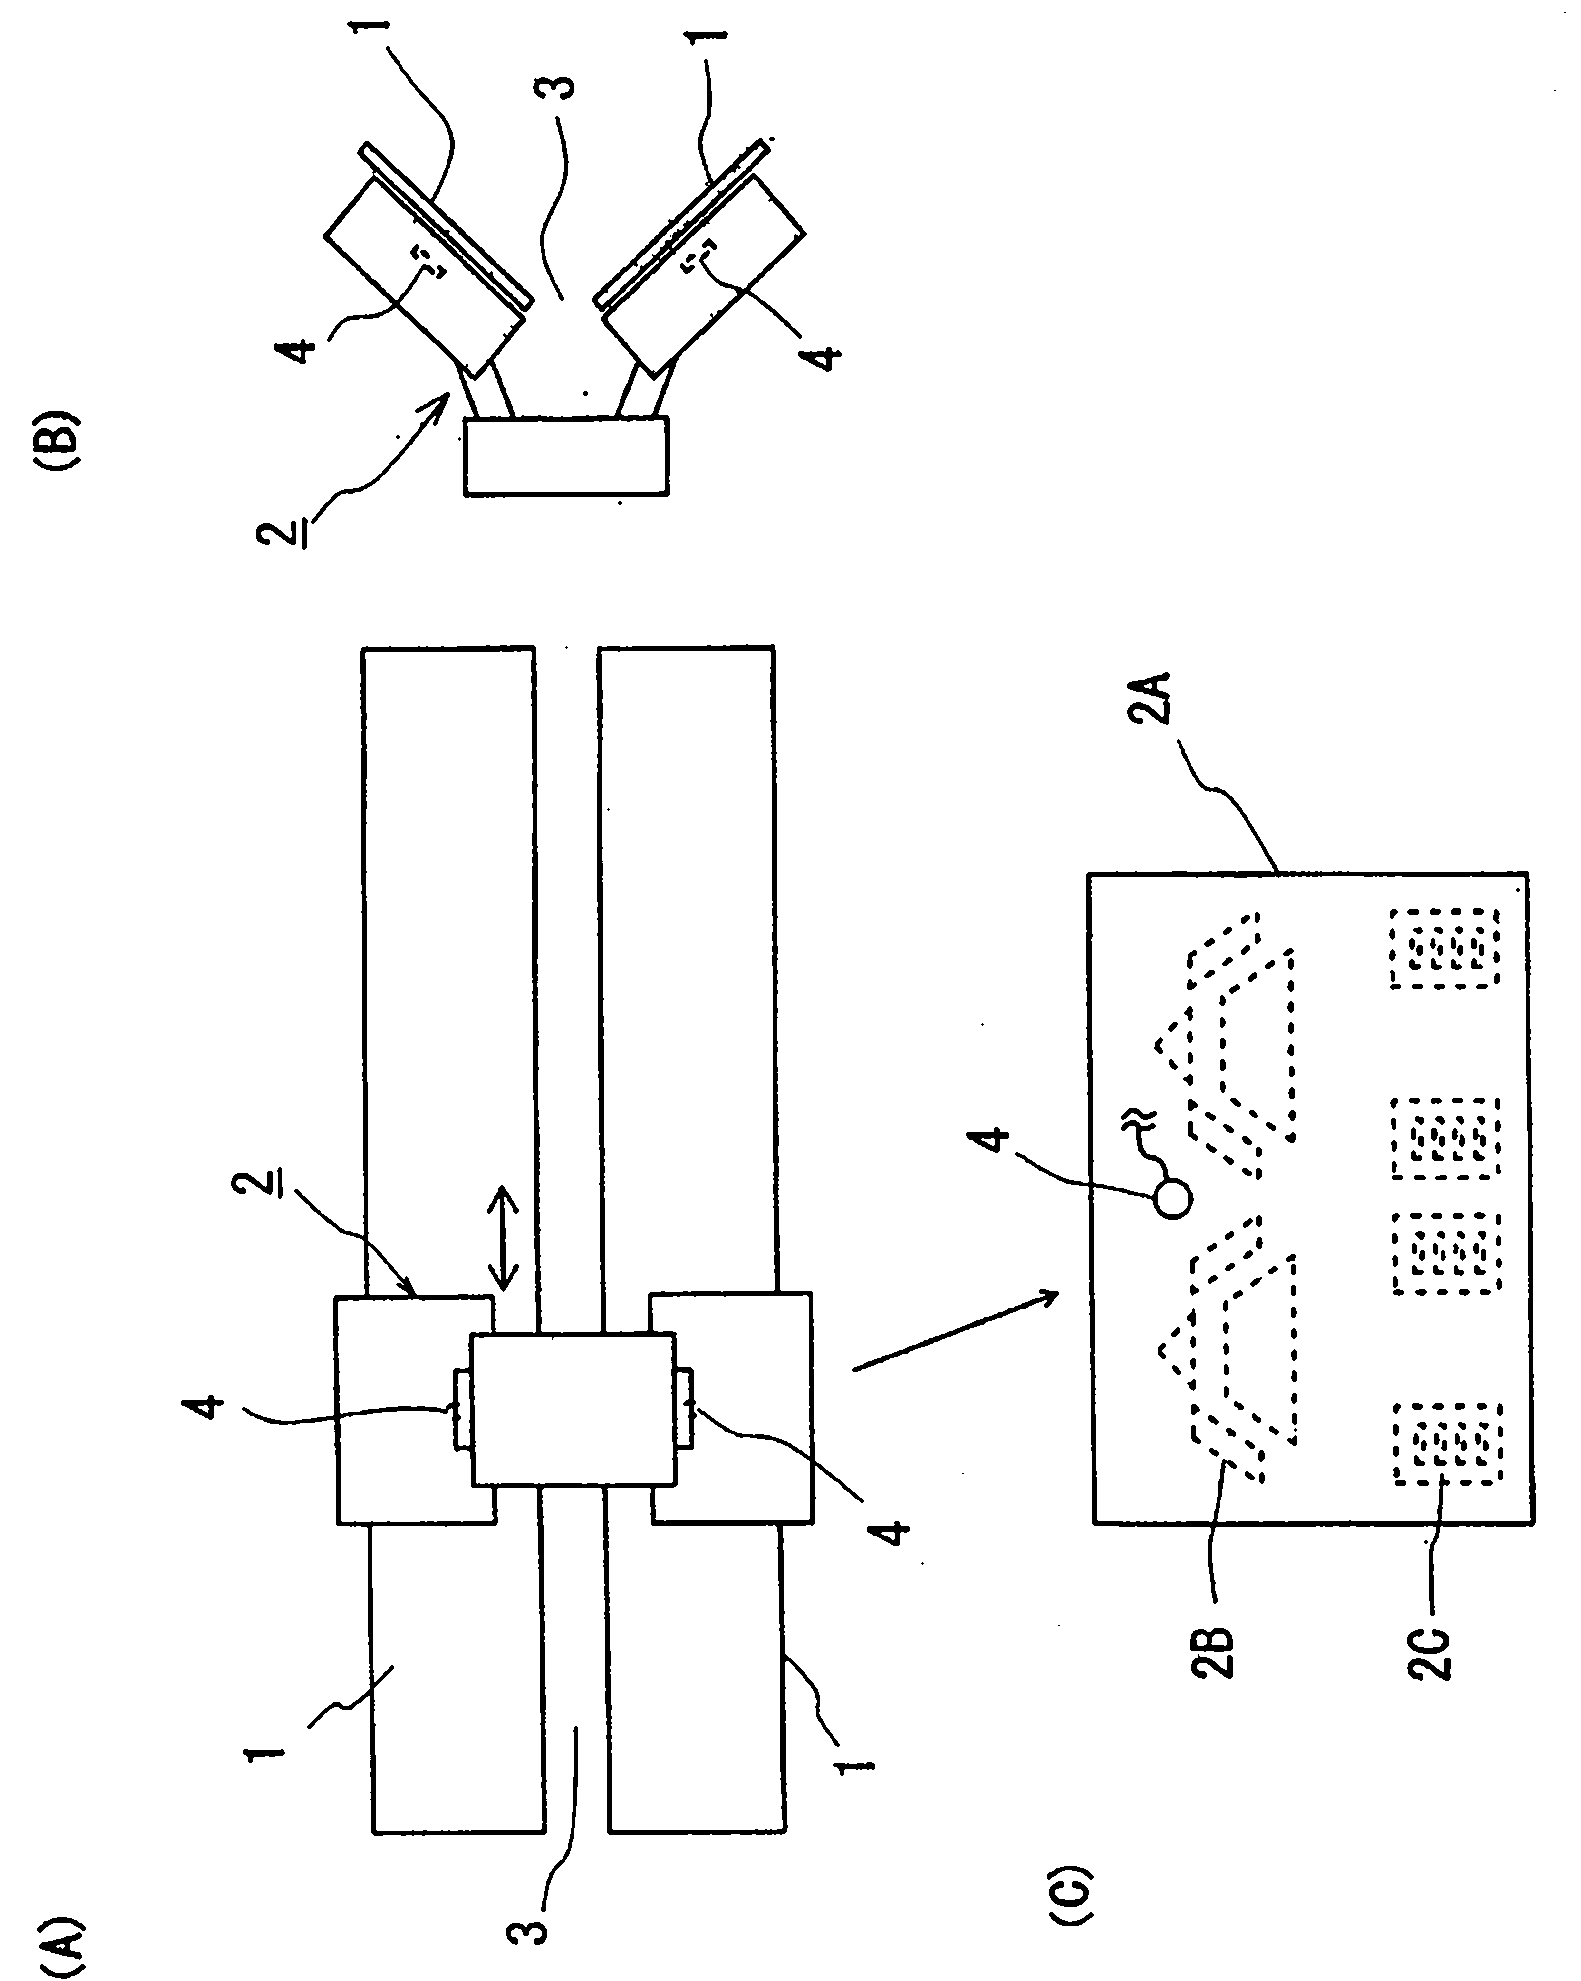 Weft knitting machine, and method for detecting abnormal vibrations in the weft knitting machine